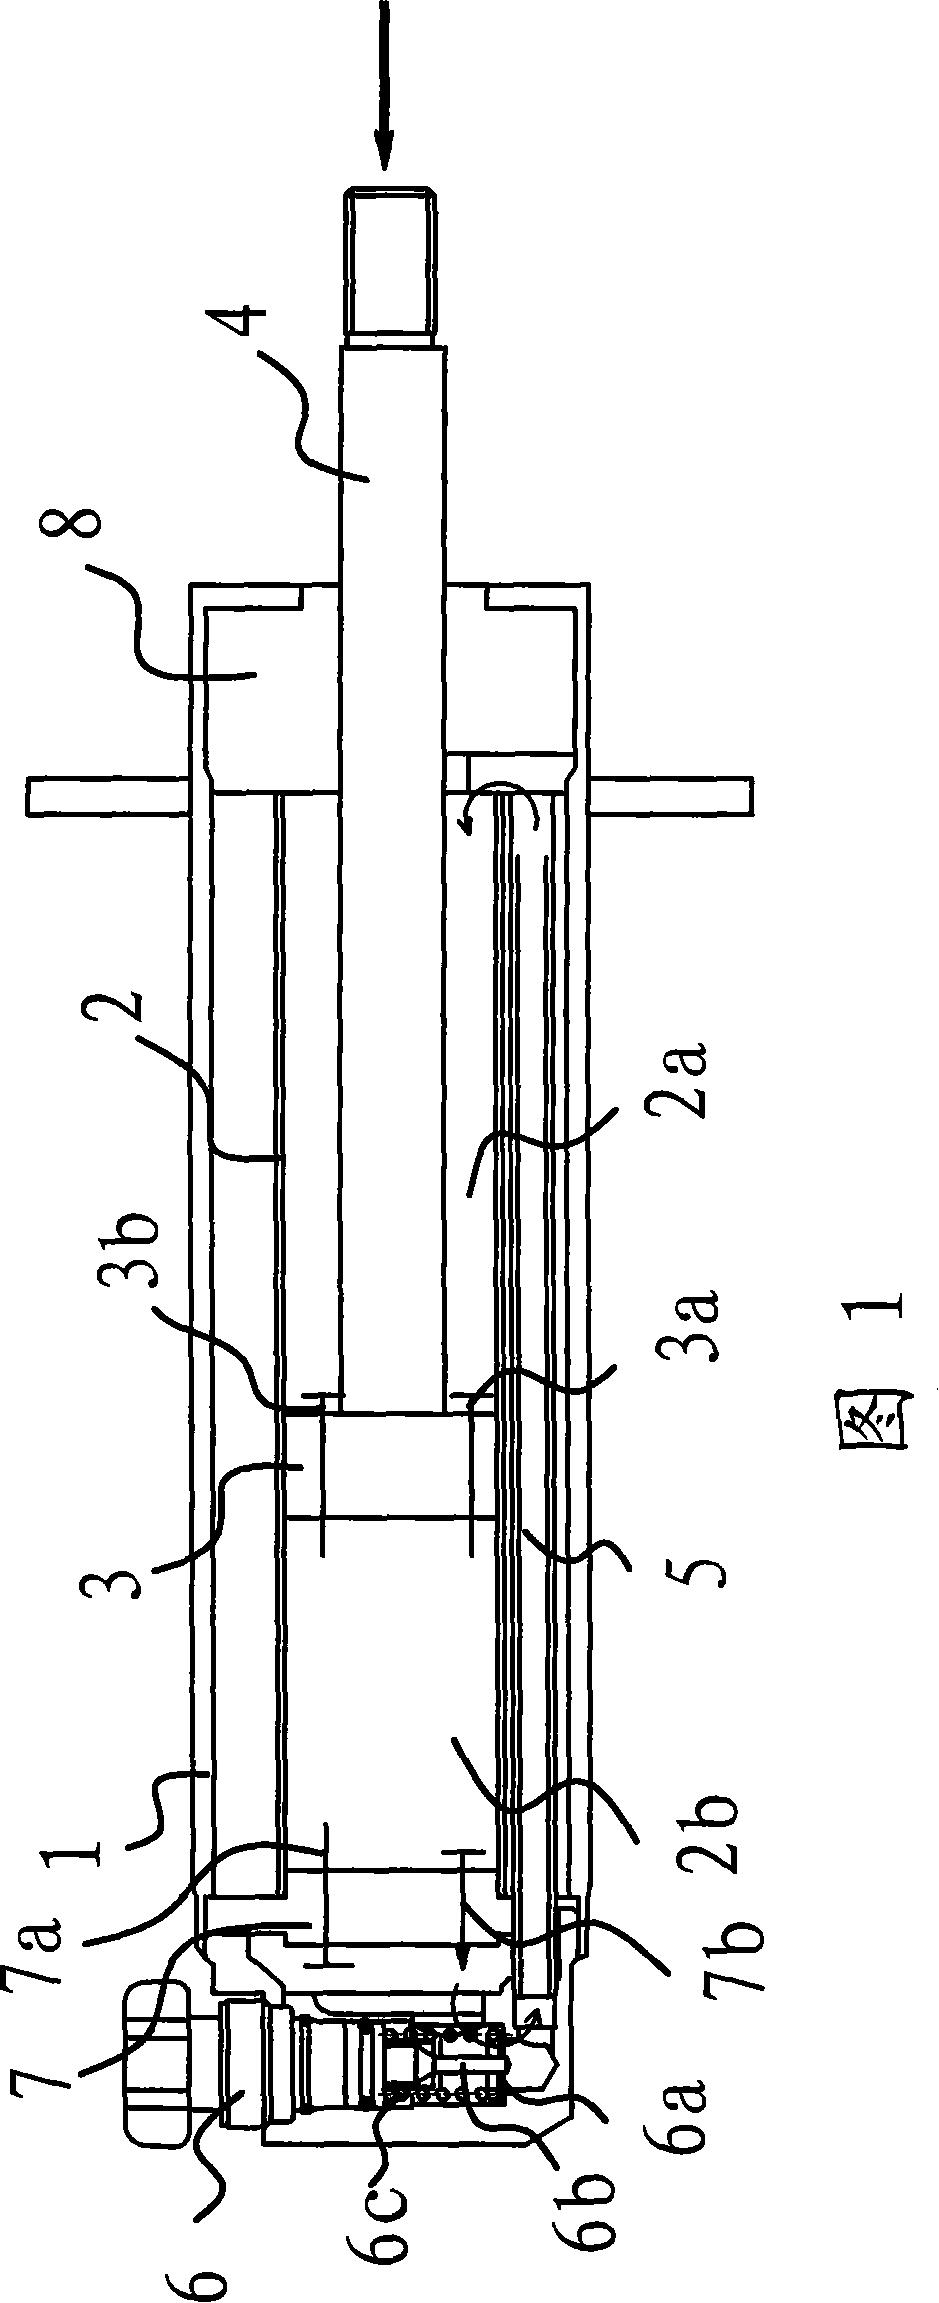 Structure-improved automobile shock absorber